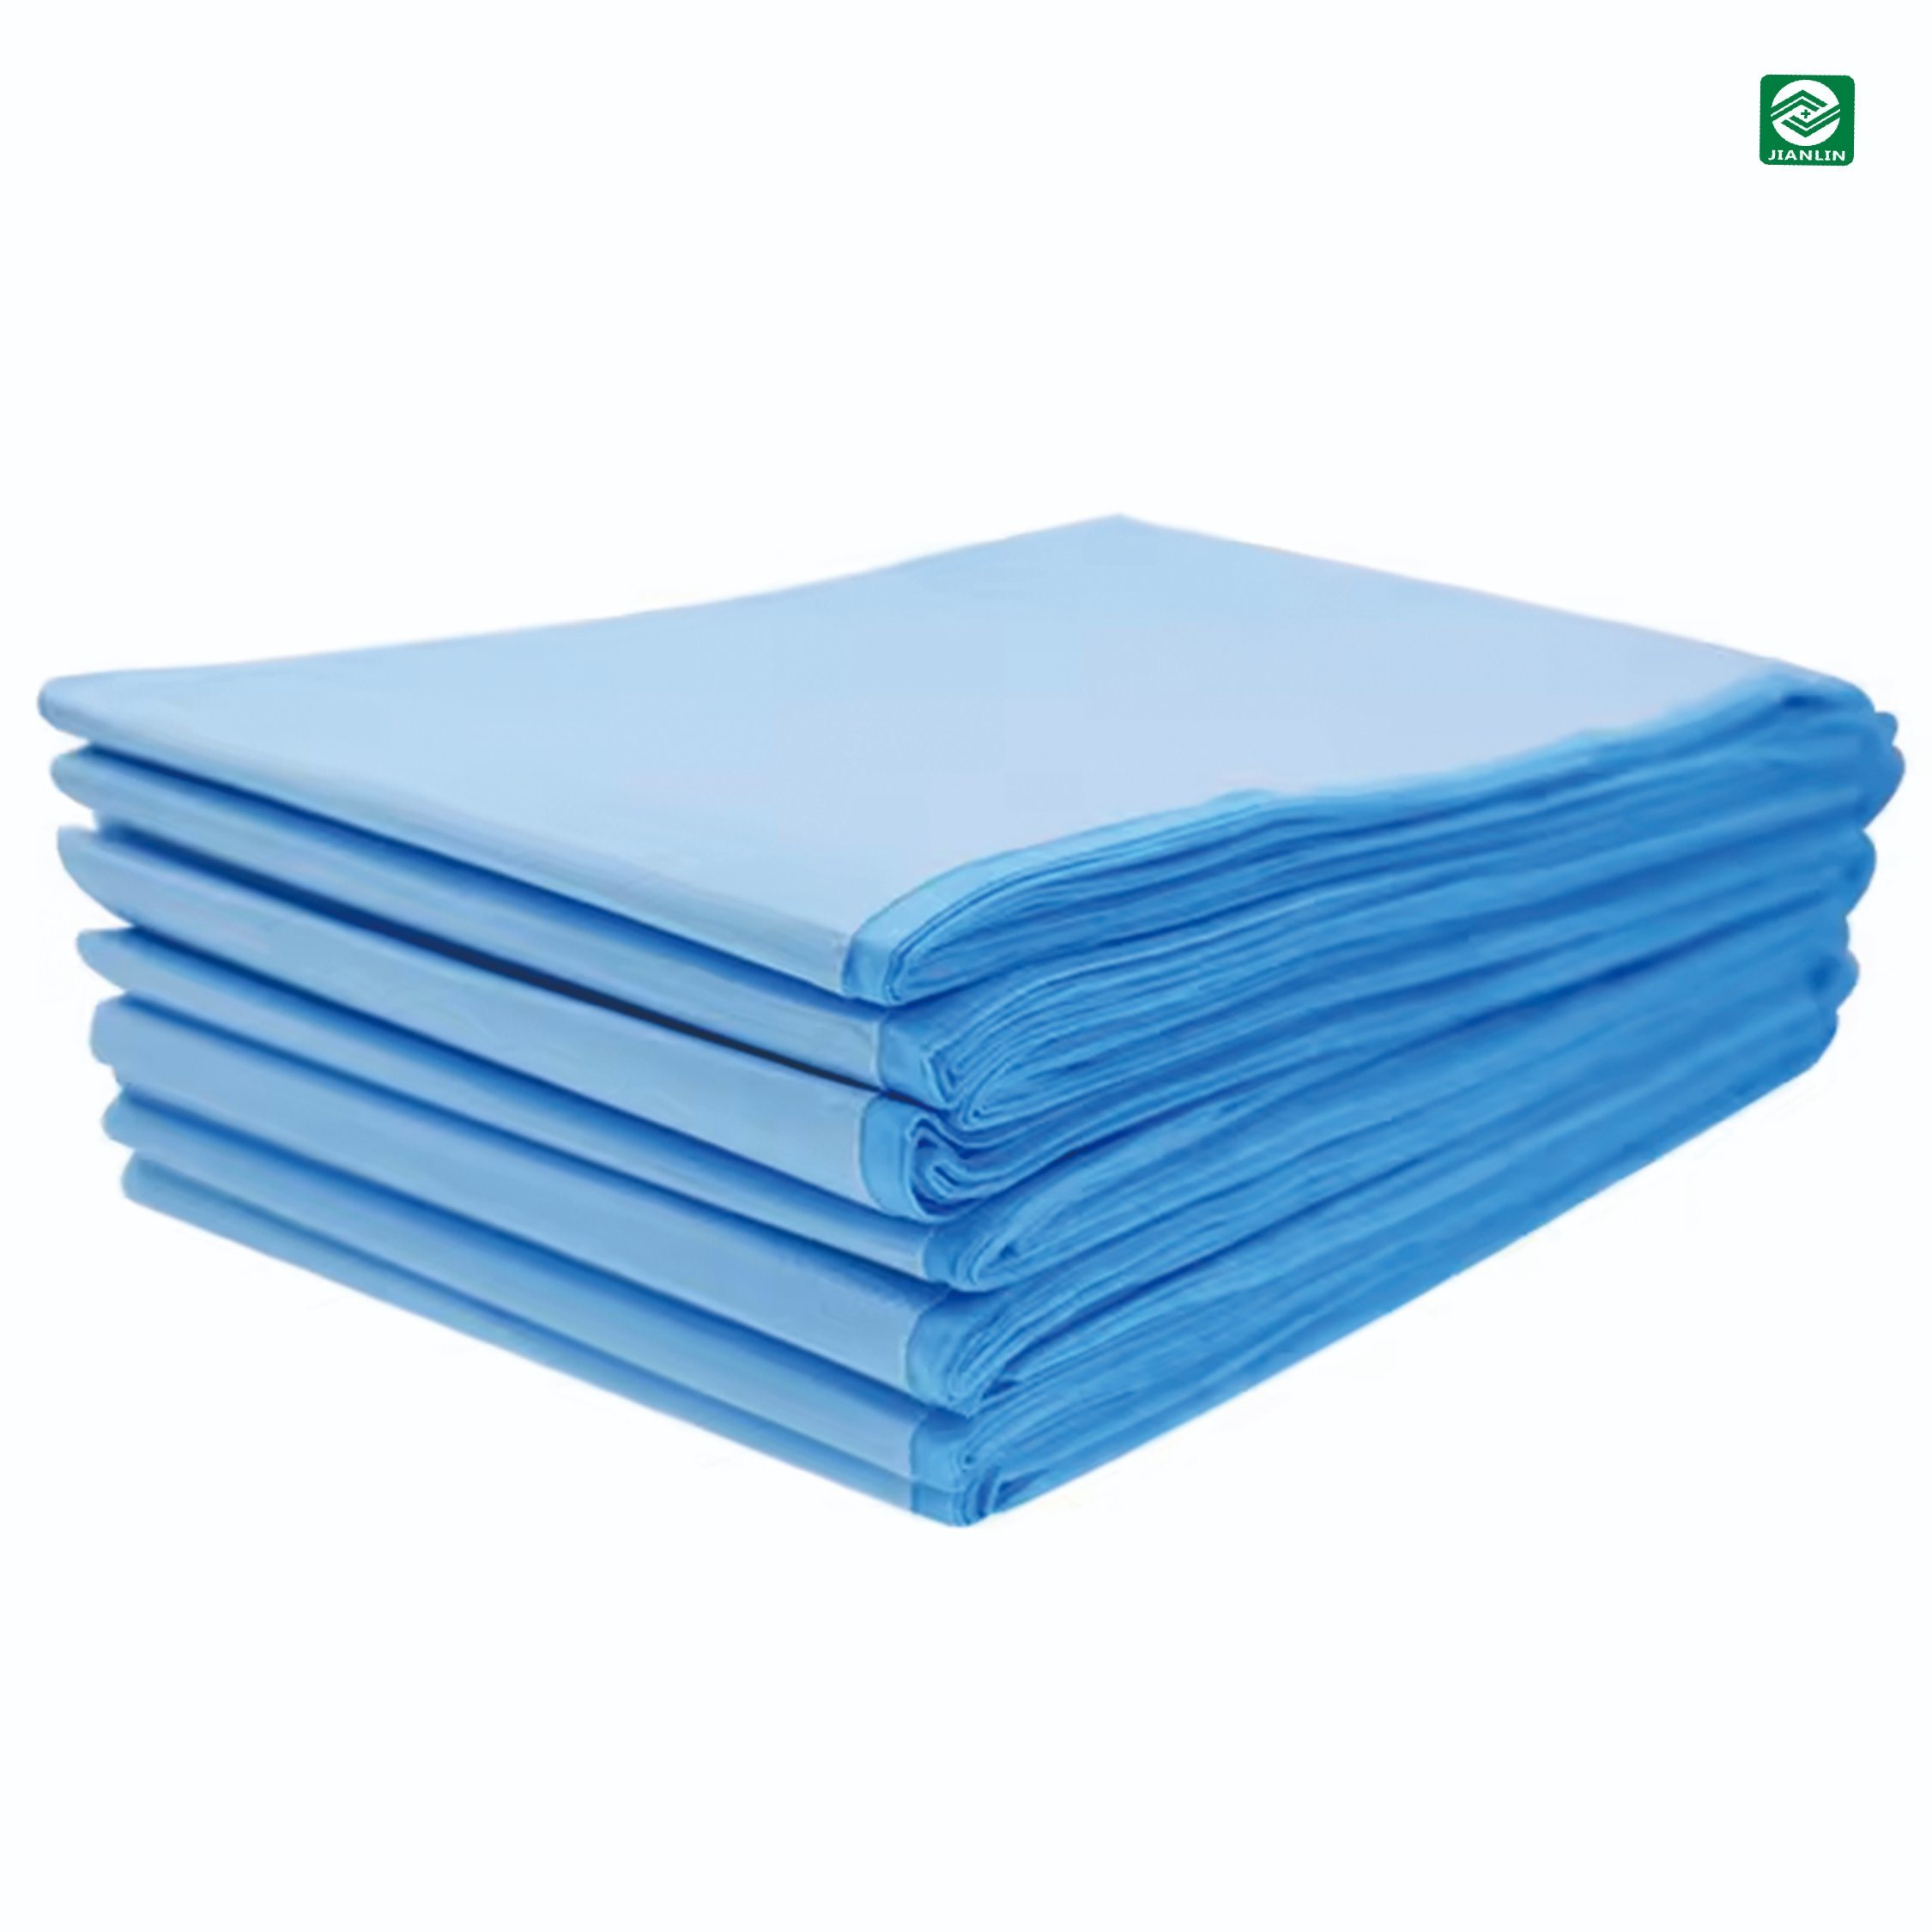 High Quality Non Woven Disposable Medical Bed Sheet Surgical Medical Hospital Bed Sheet